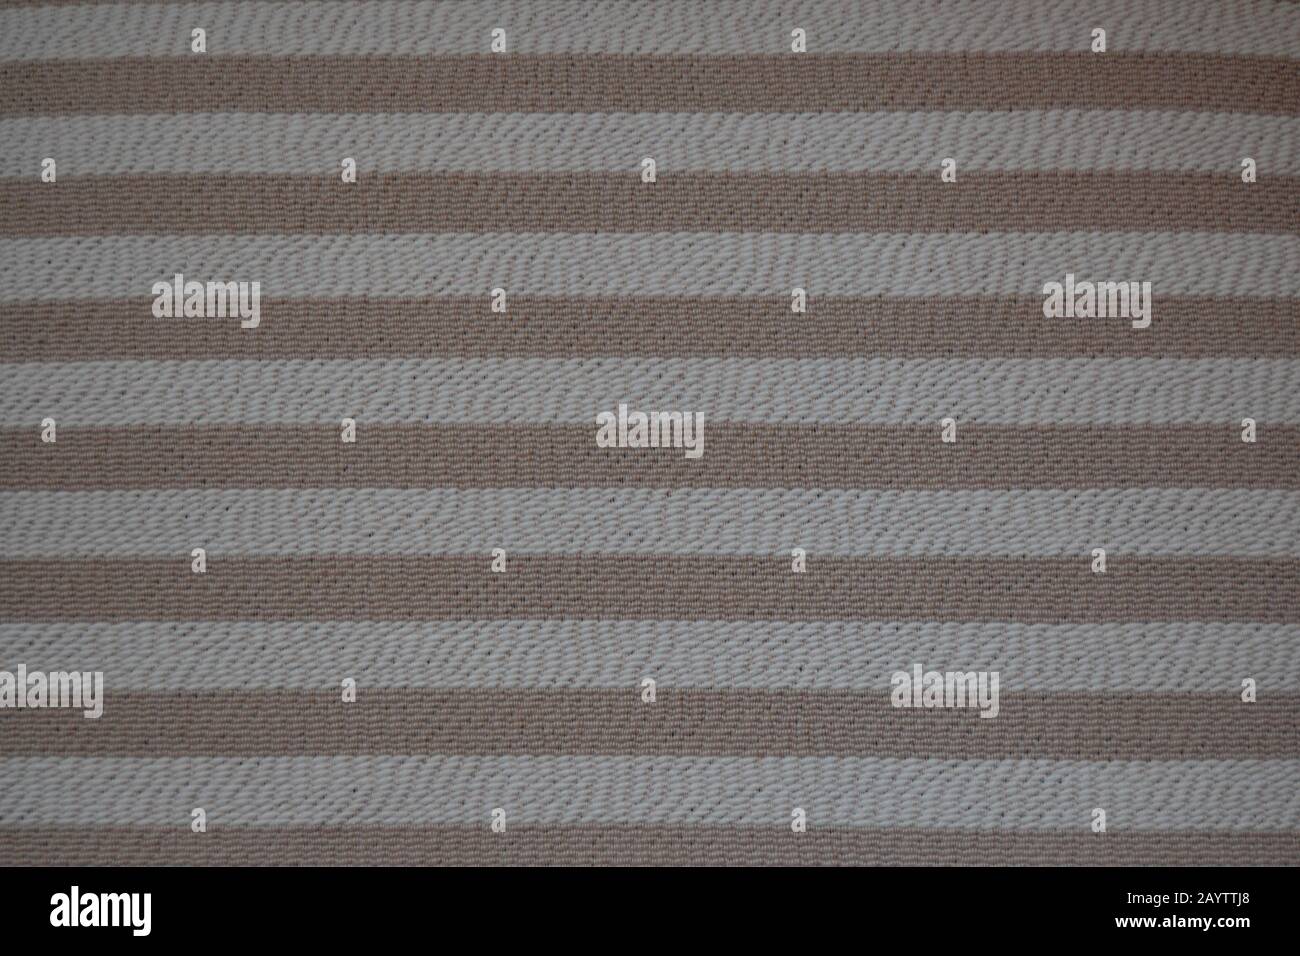 Rough texture background in beige and dirty white, made with horizontal stripes in brown tones Stock Photo